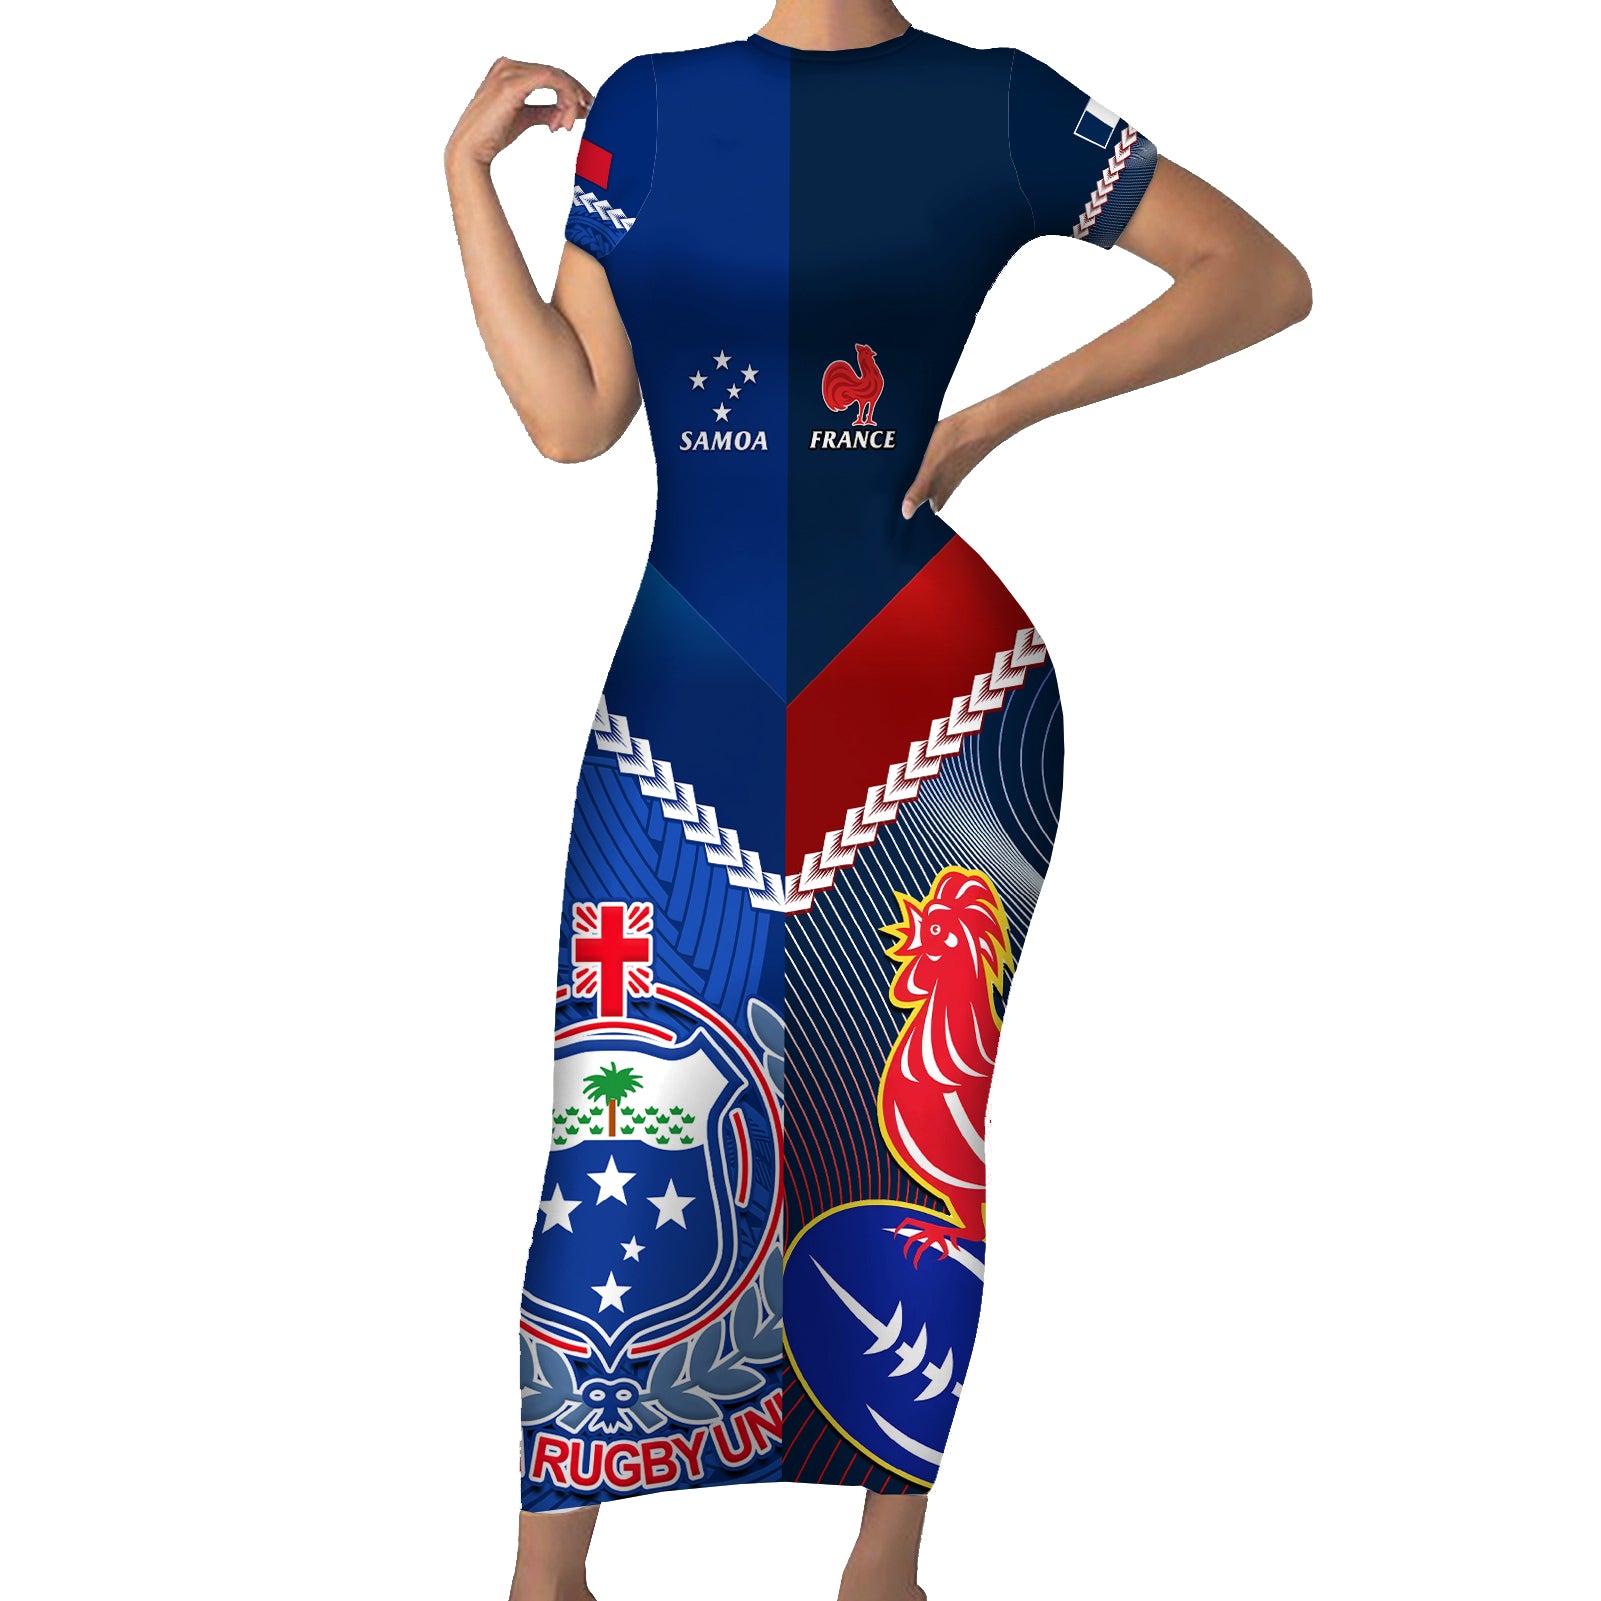 samoa-and-france-rugby-short-sleeve-bodycon-dress-2023-world-cup-manu-samoa-with-les-bleus